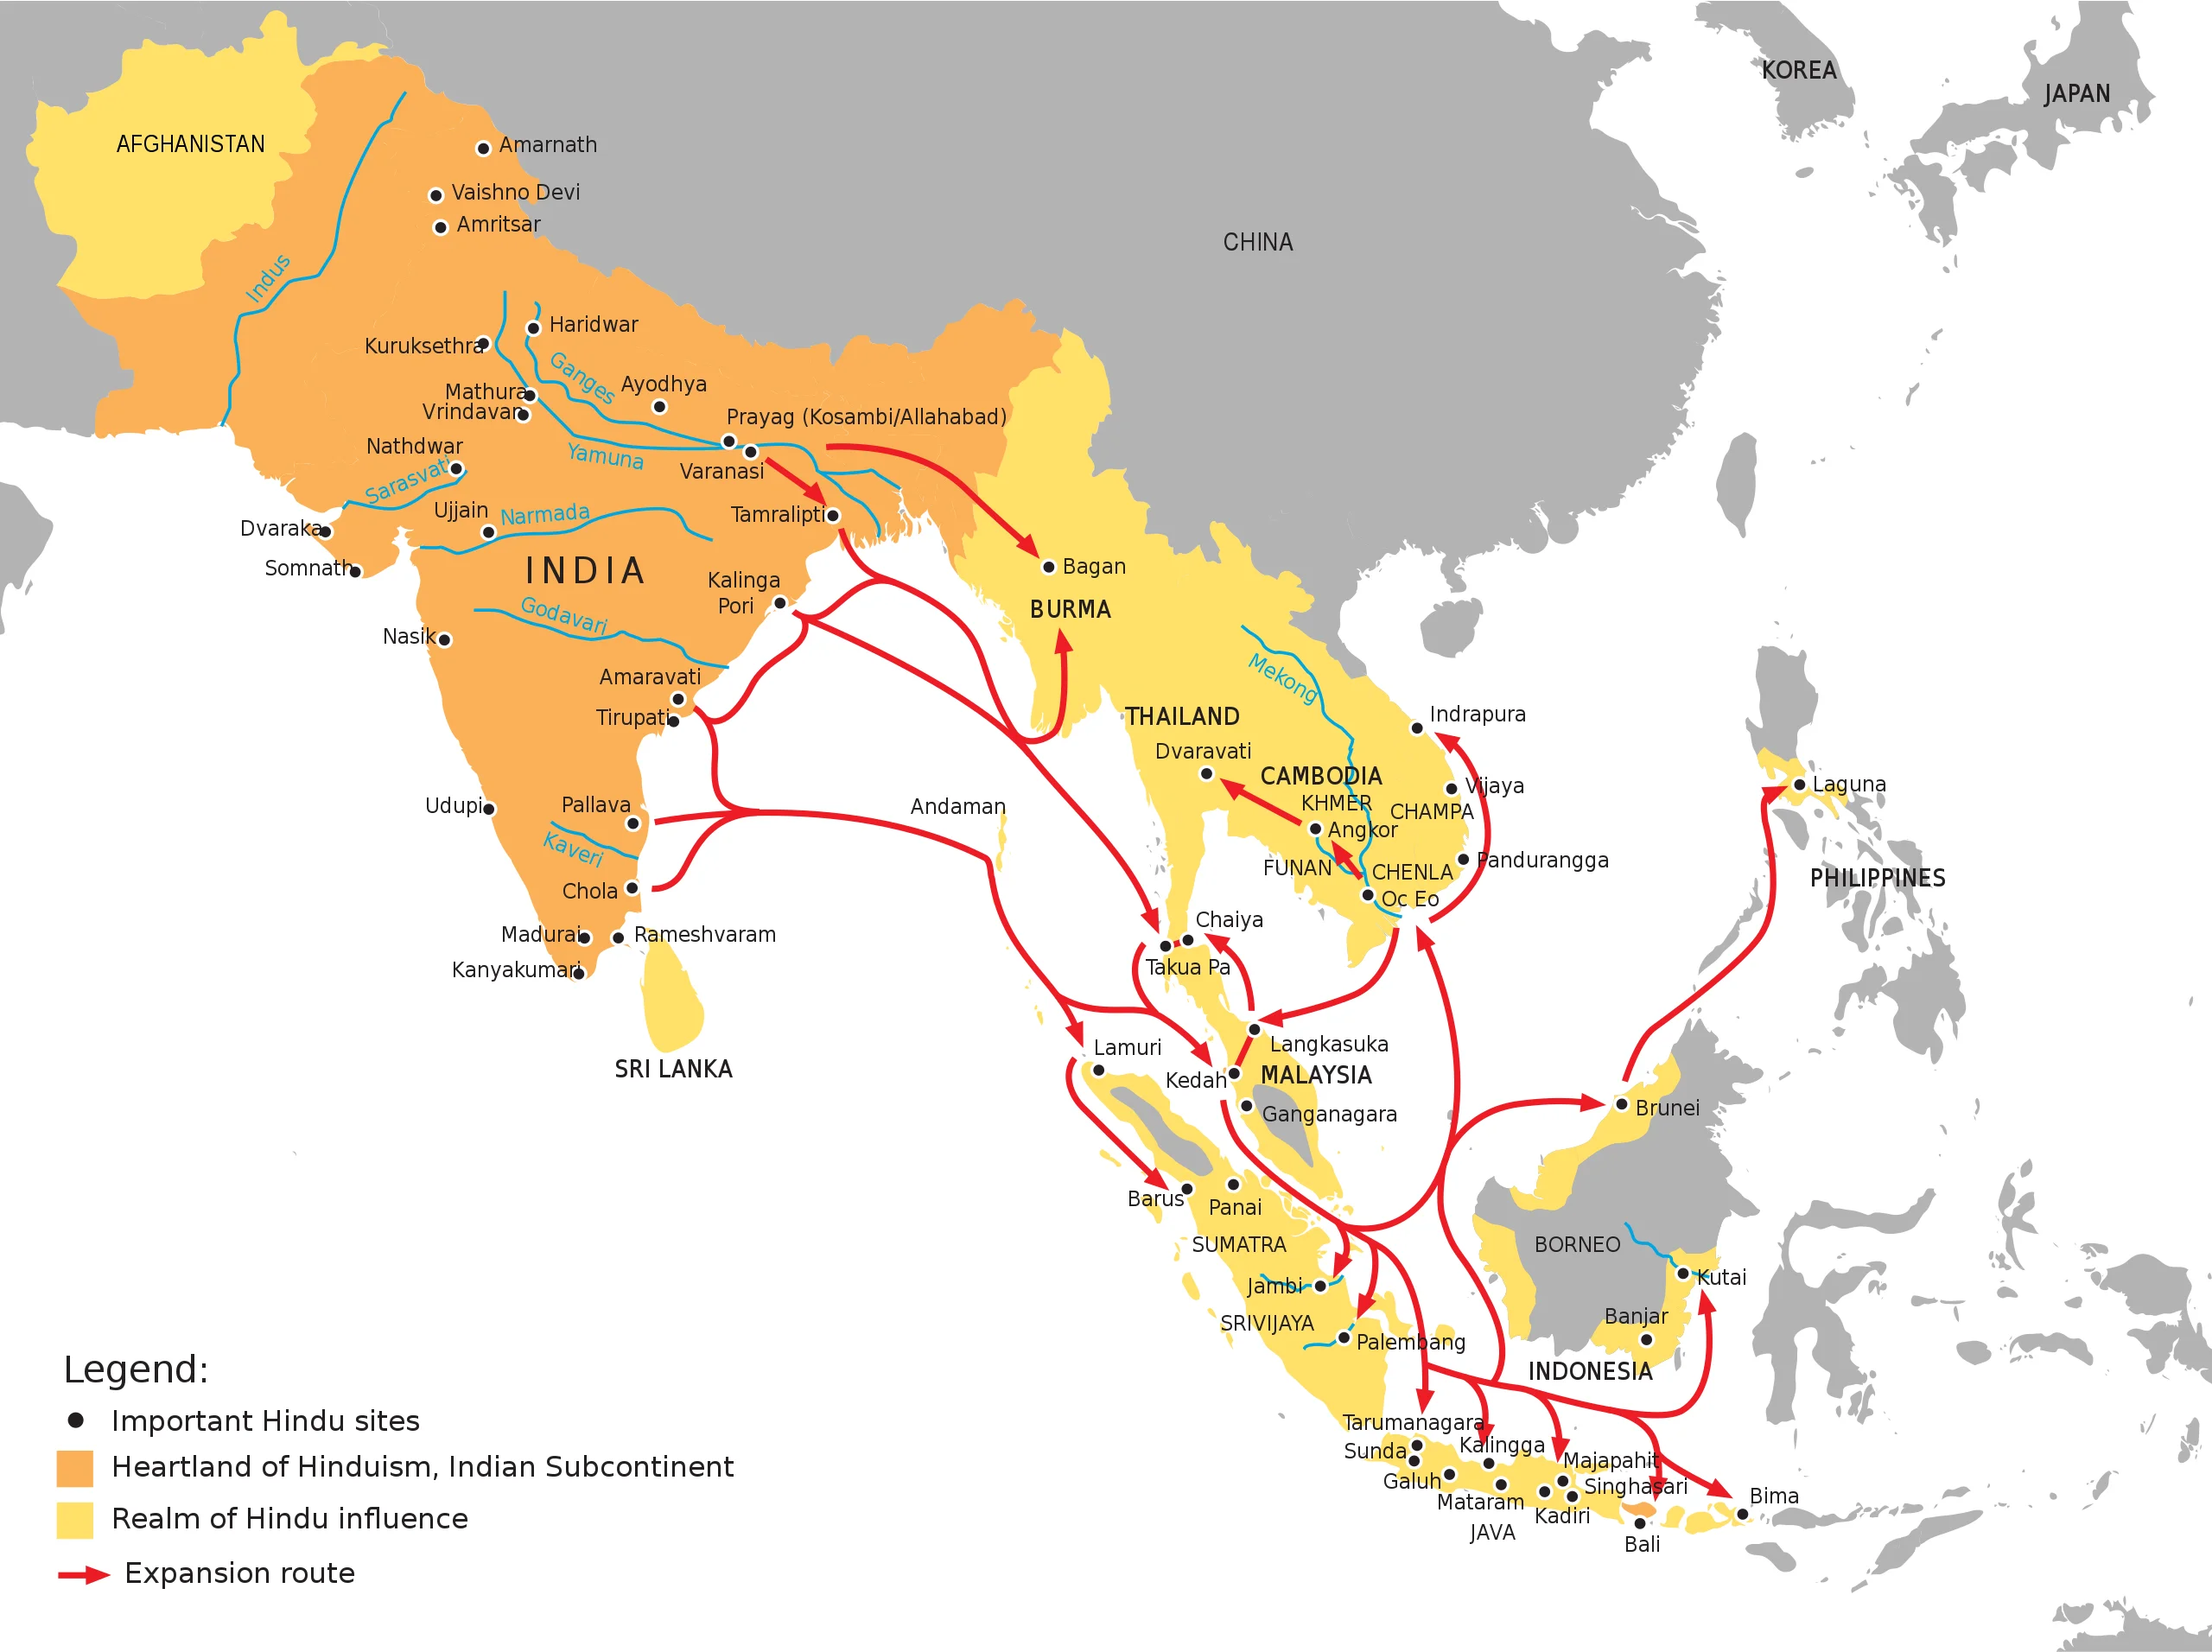 Hindu Expansion in Asia